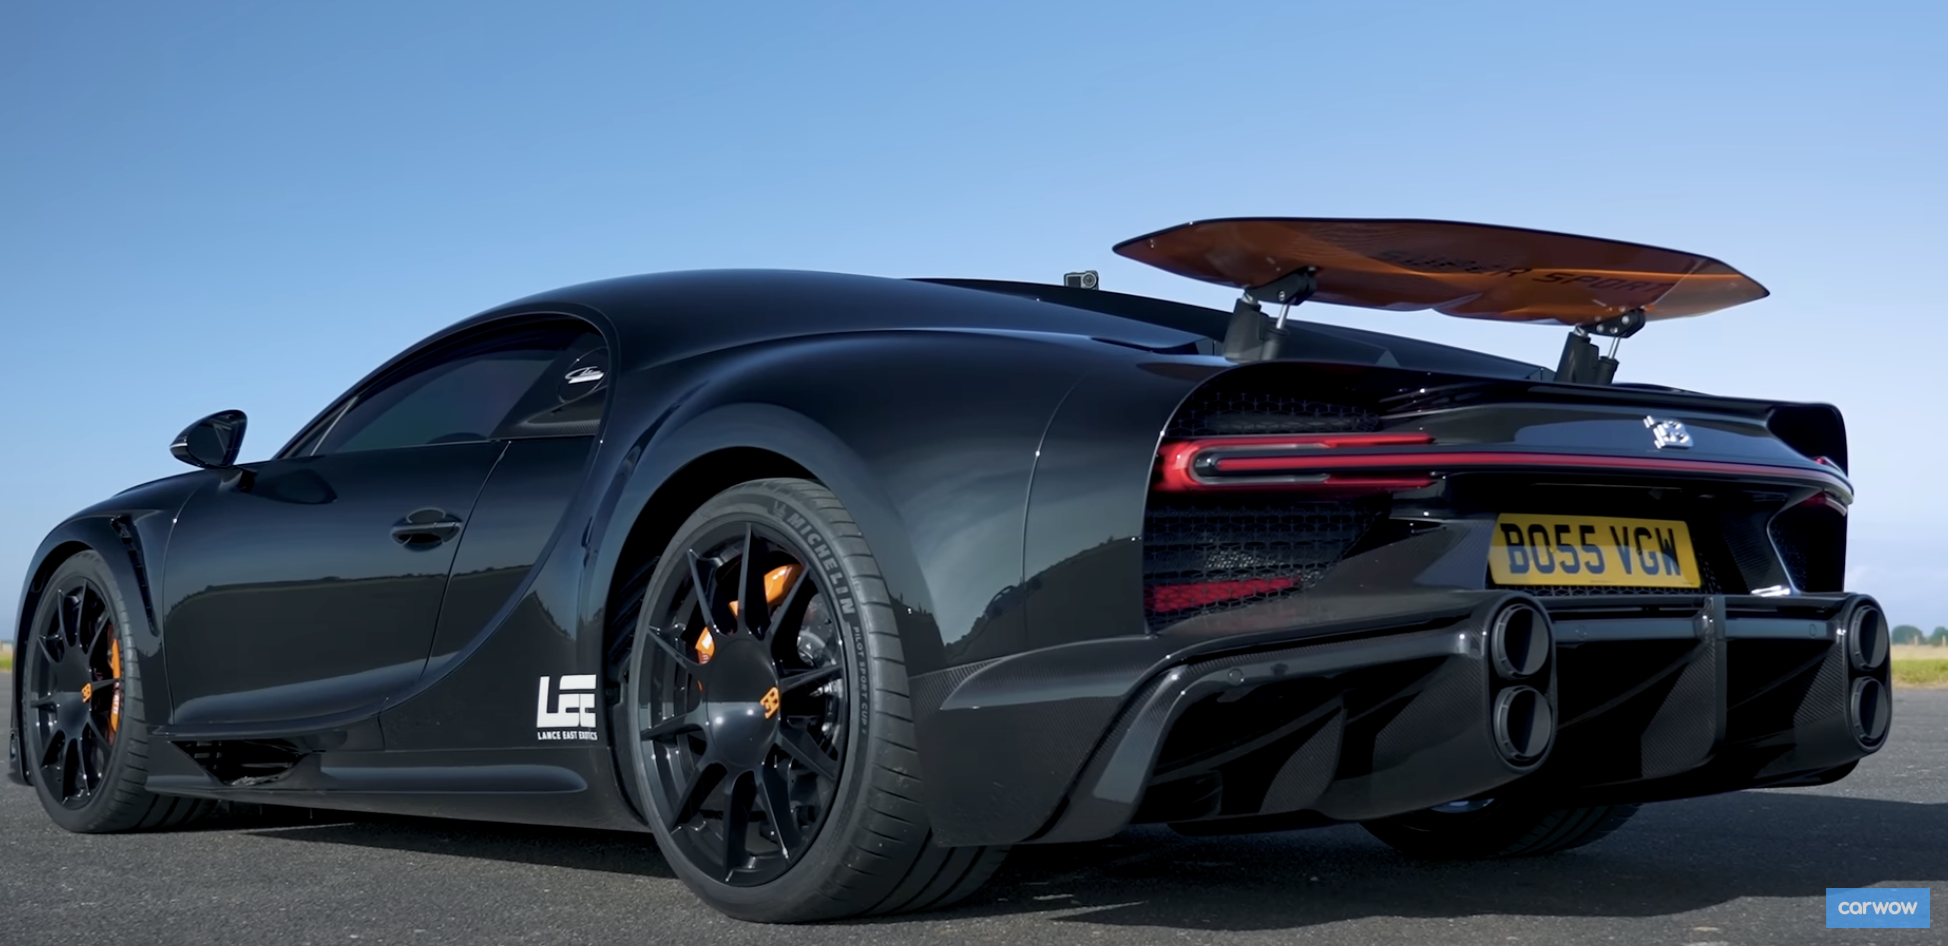 Chiron Super Sport Battles Twin-Turbo Lambo and Electric WRX Rally Car